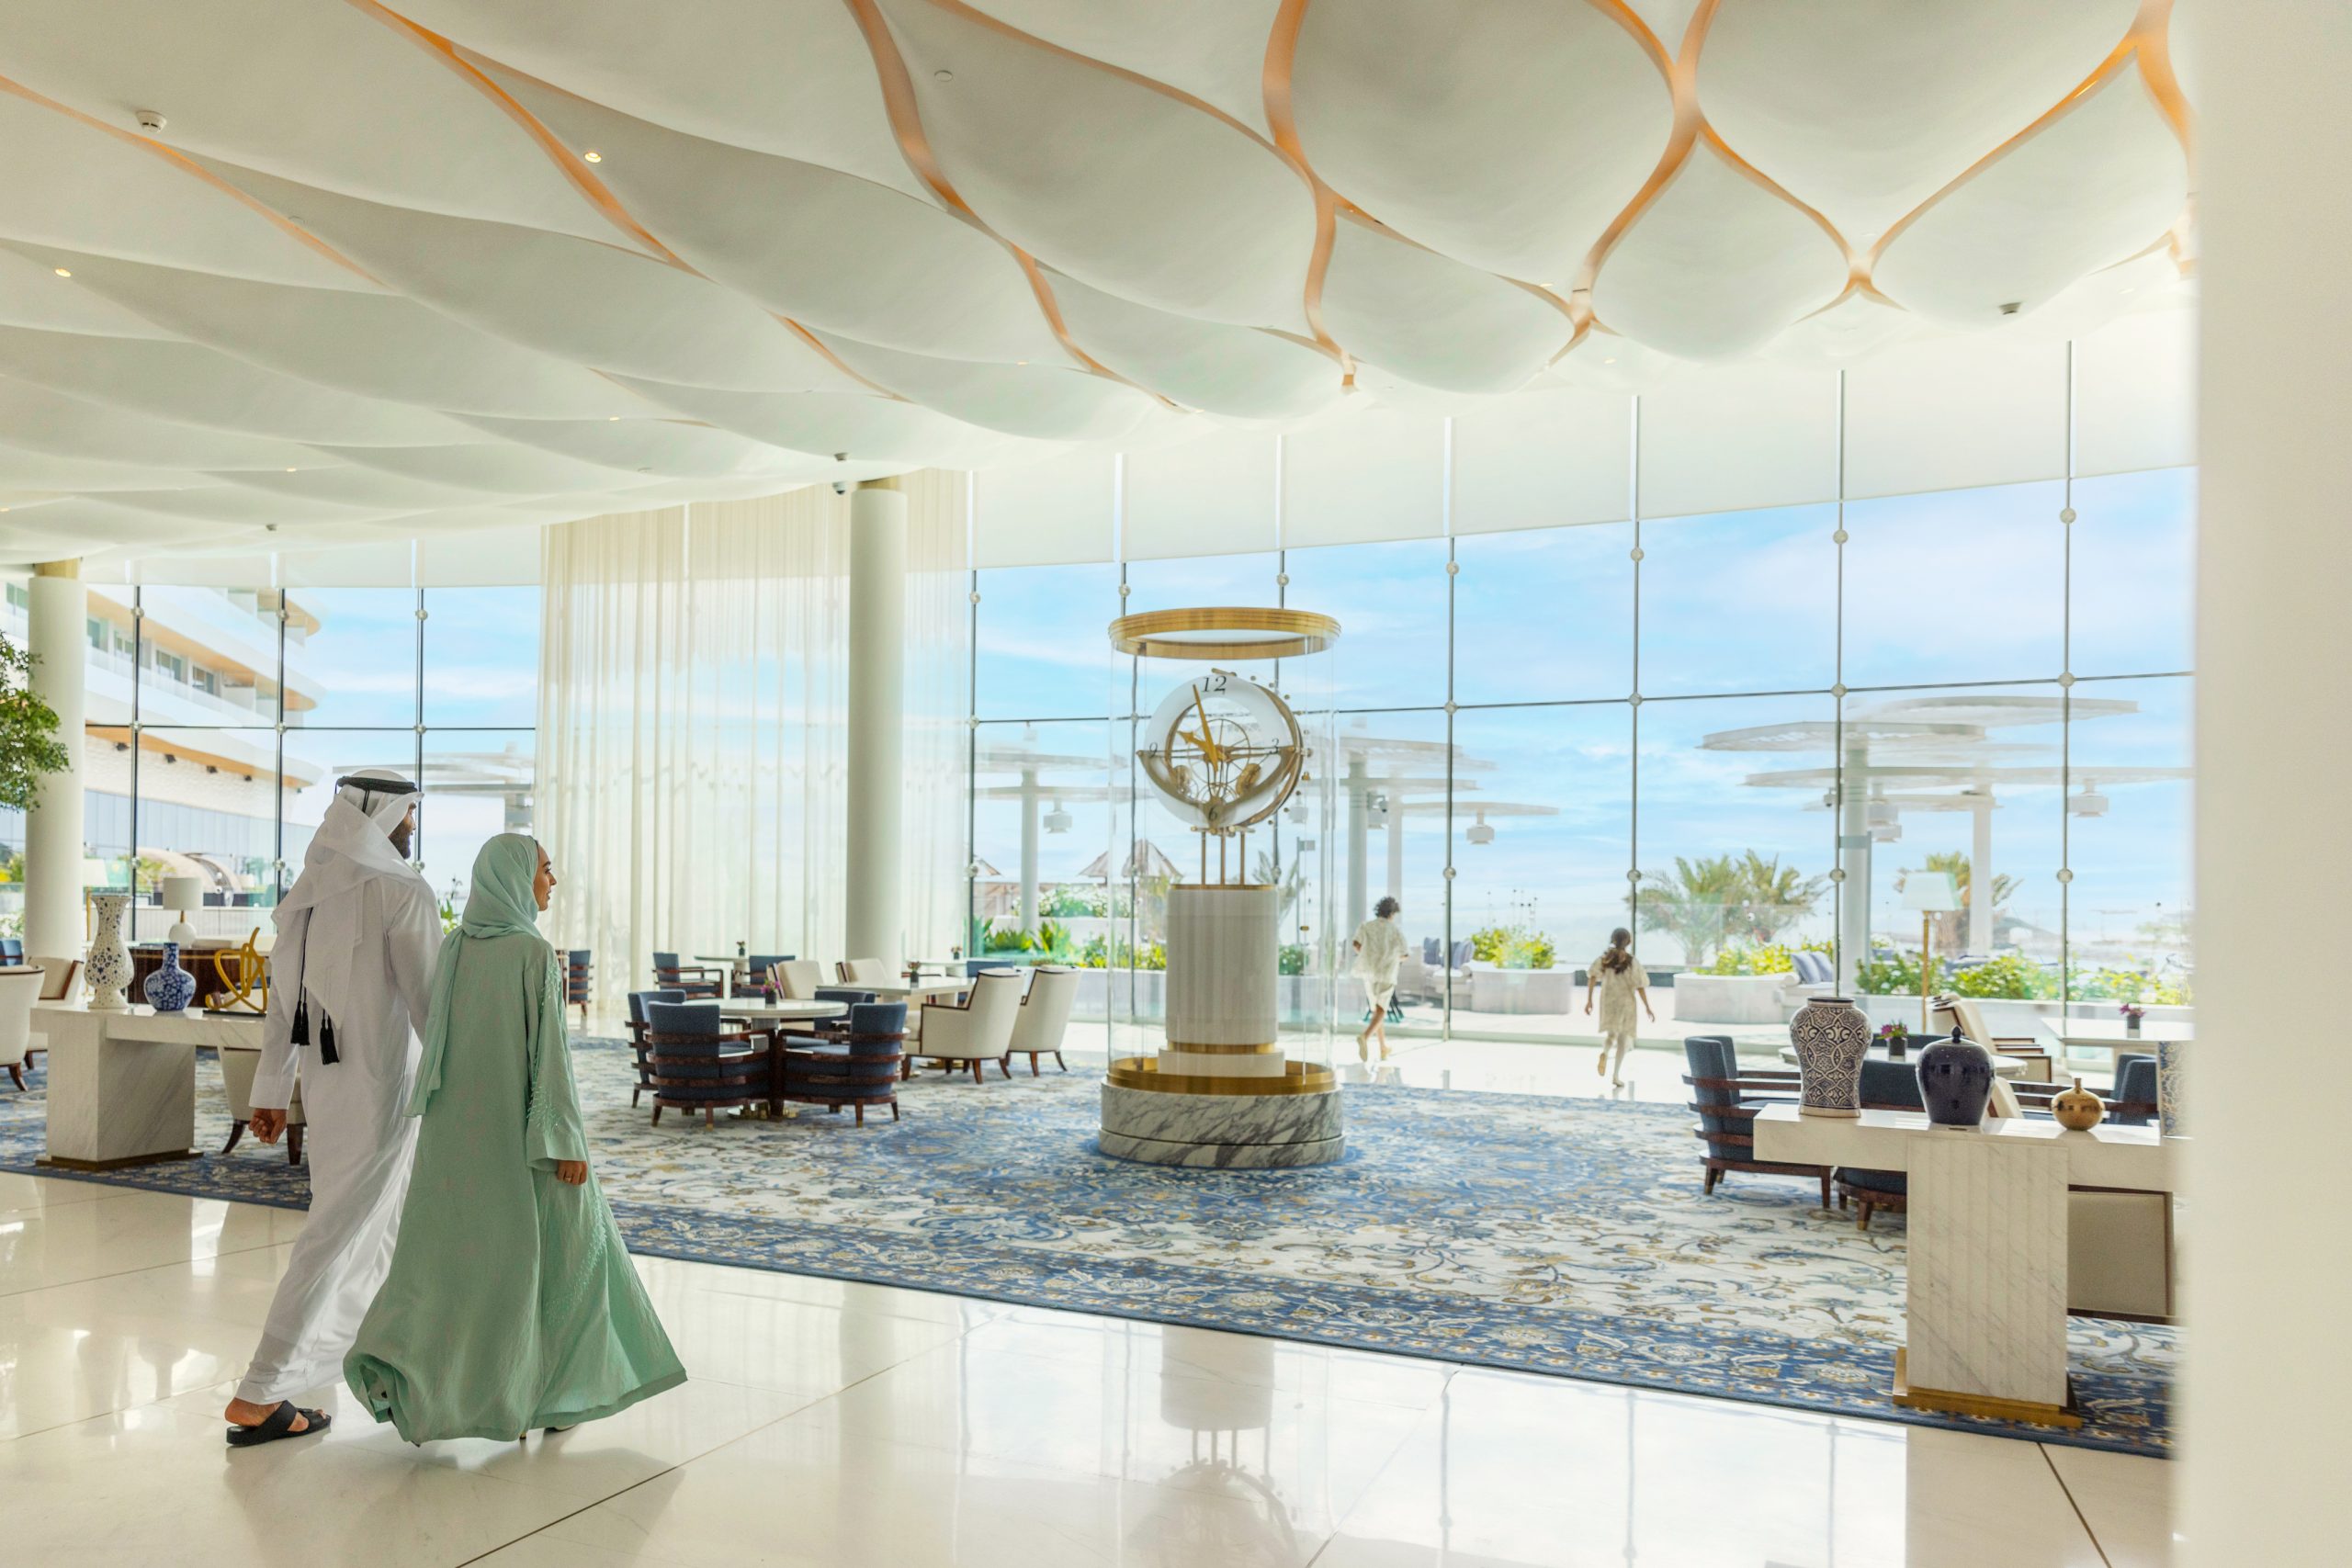 Discover Waldorf Astoria Lusail this Summer